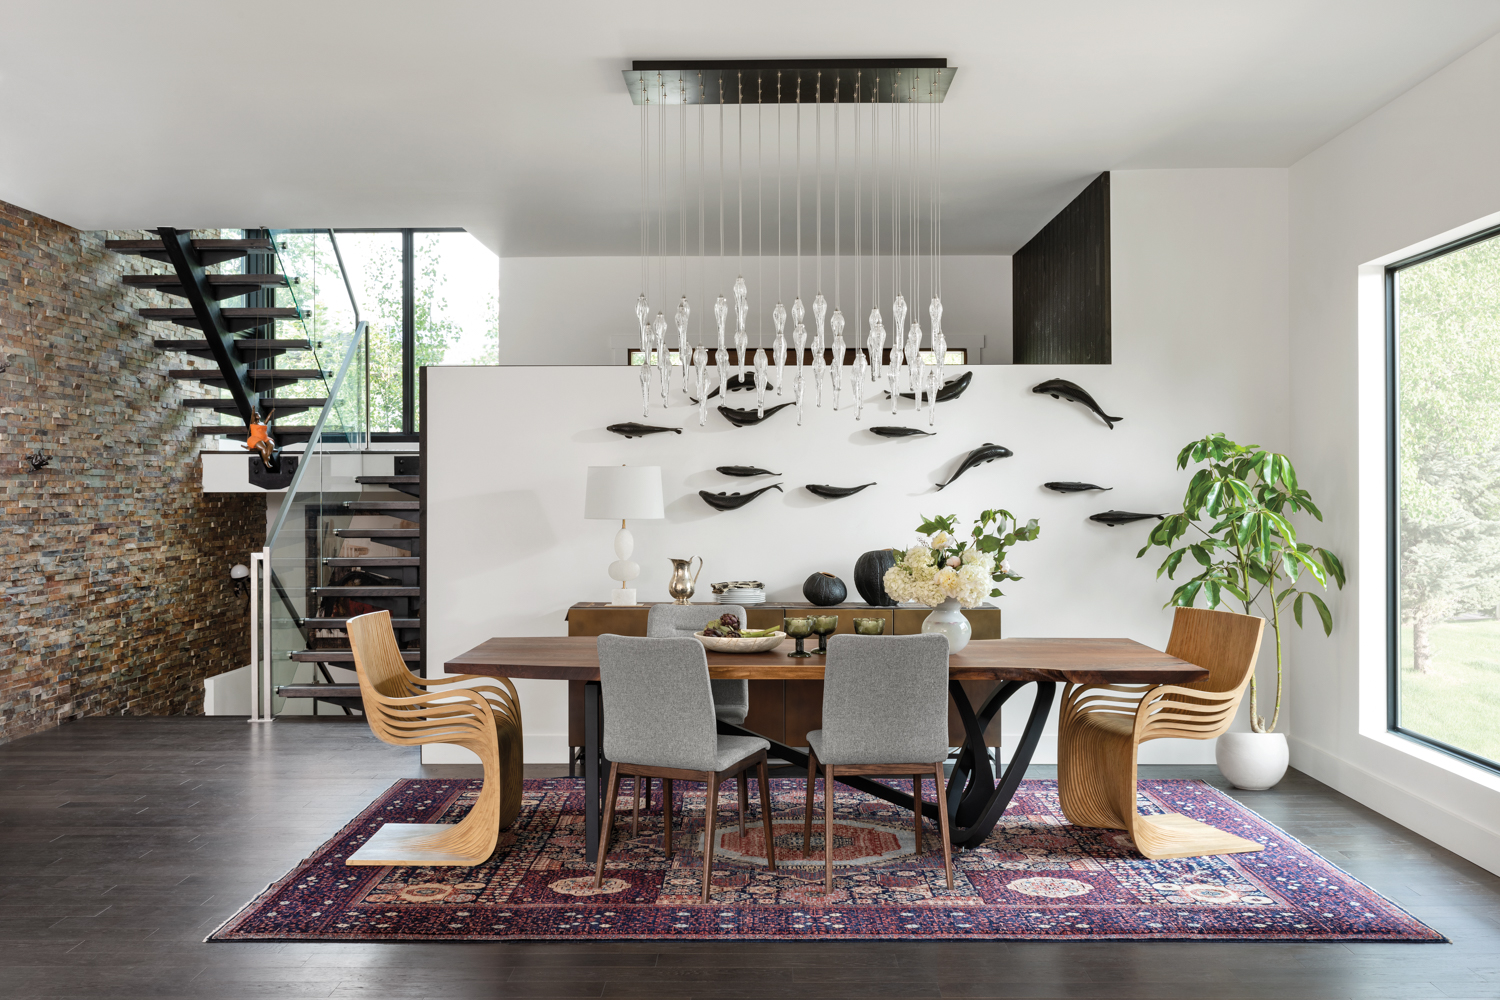 dining table and chairs below a spear pendant installation and bronze carp artwork on the wall